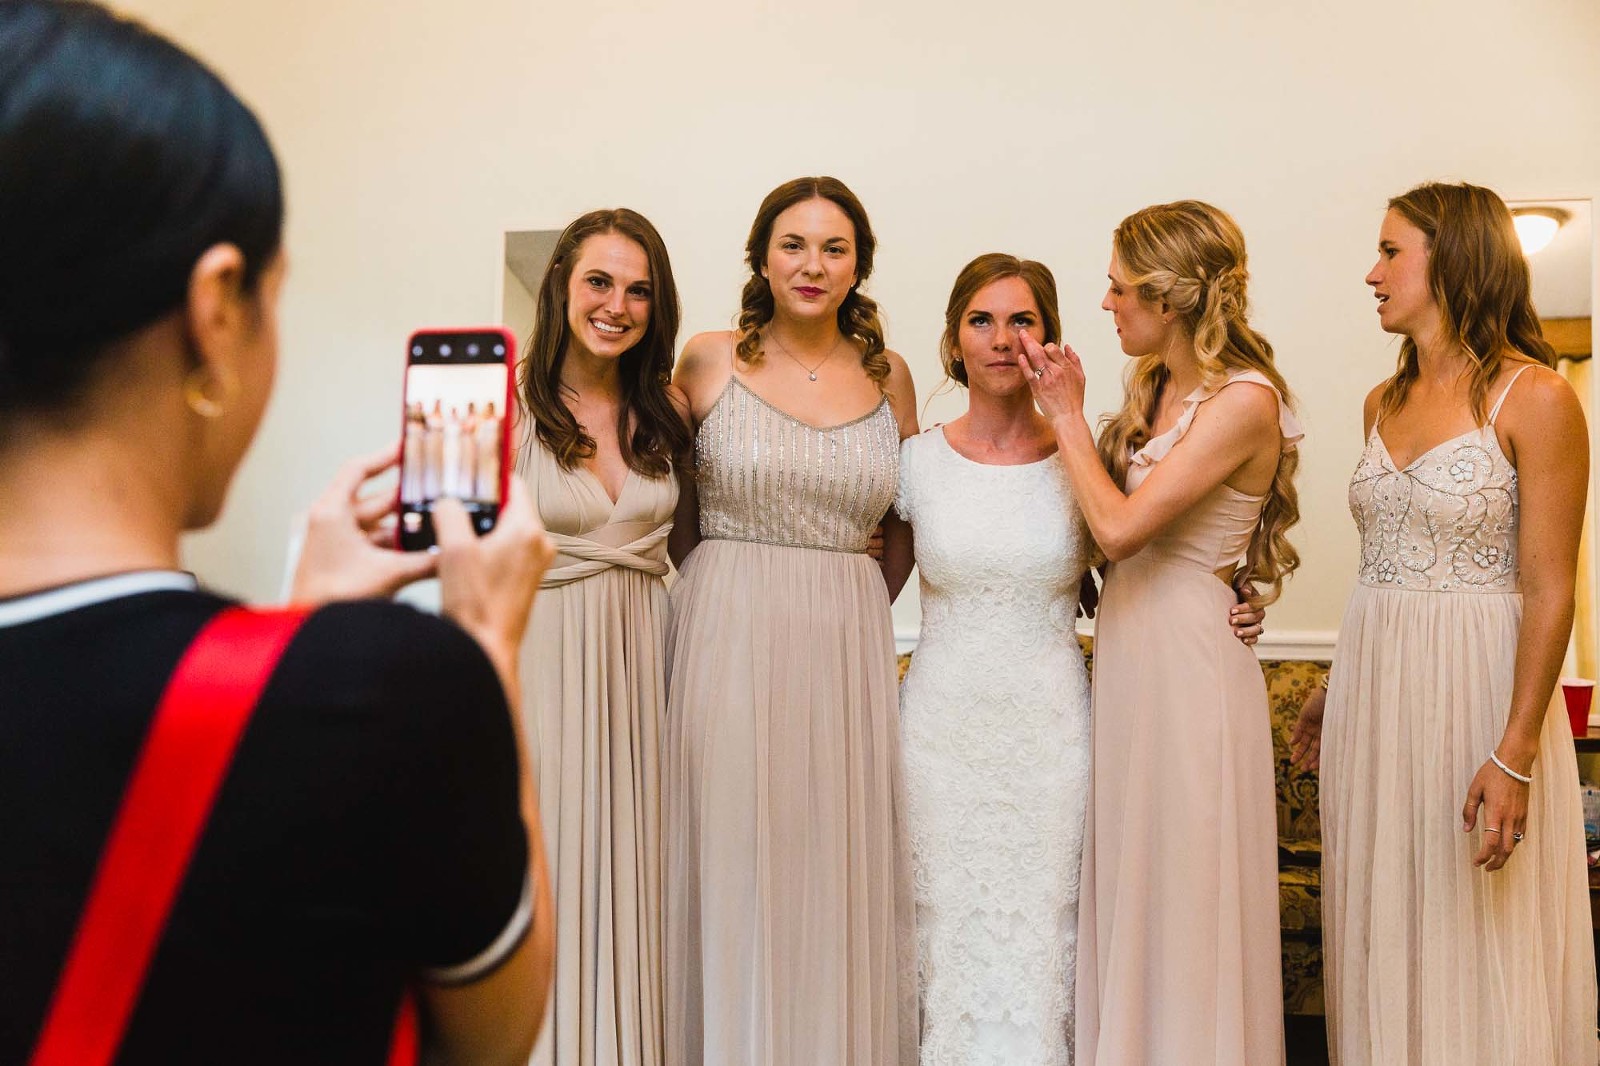 bride and bridesmaids check each other for perfection, before being photographed together. bridesmaid wipes something off bride's face. 